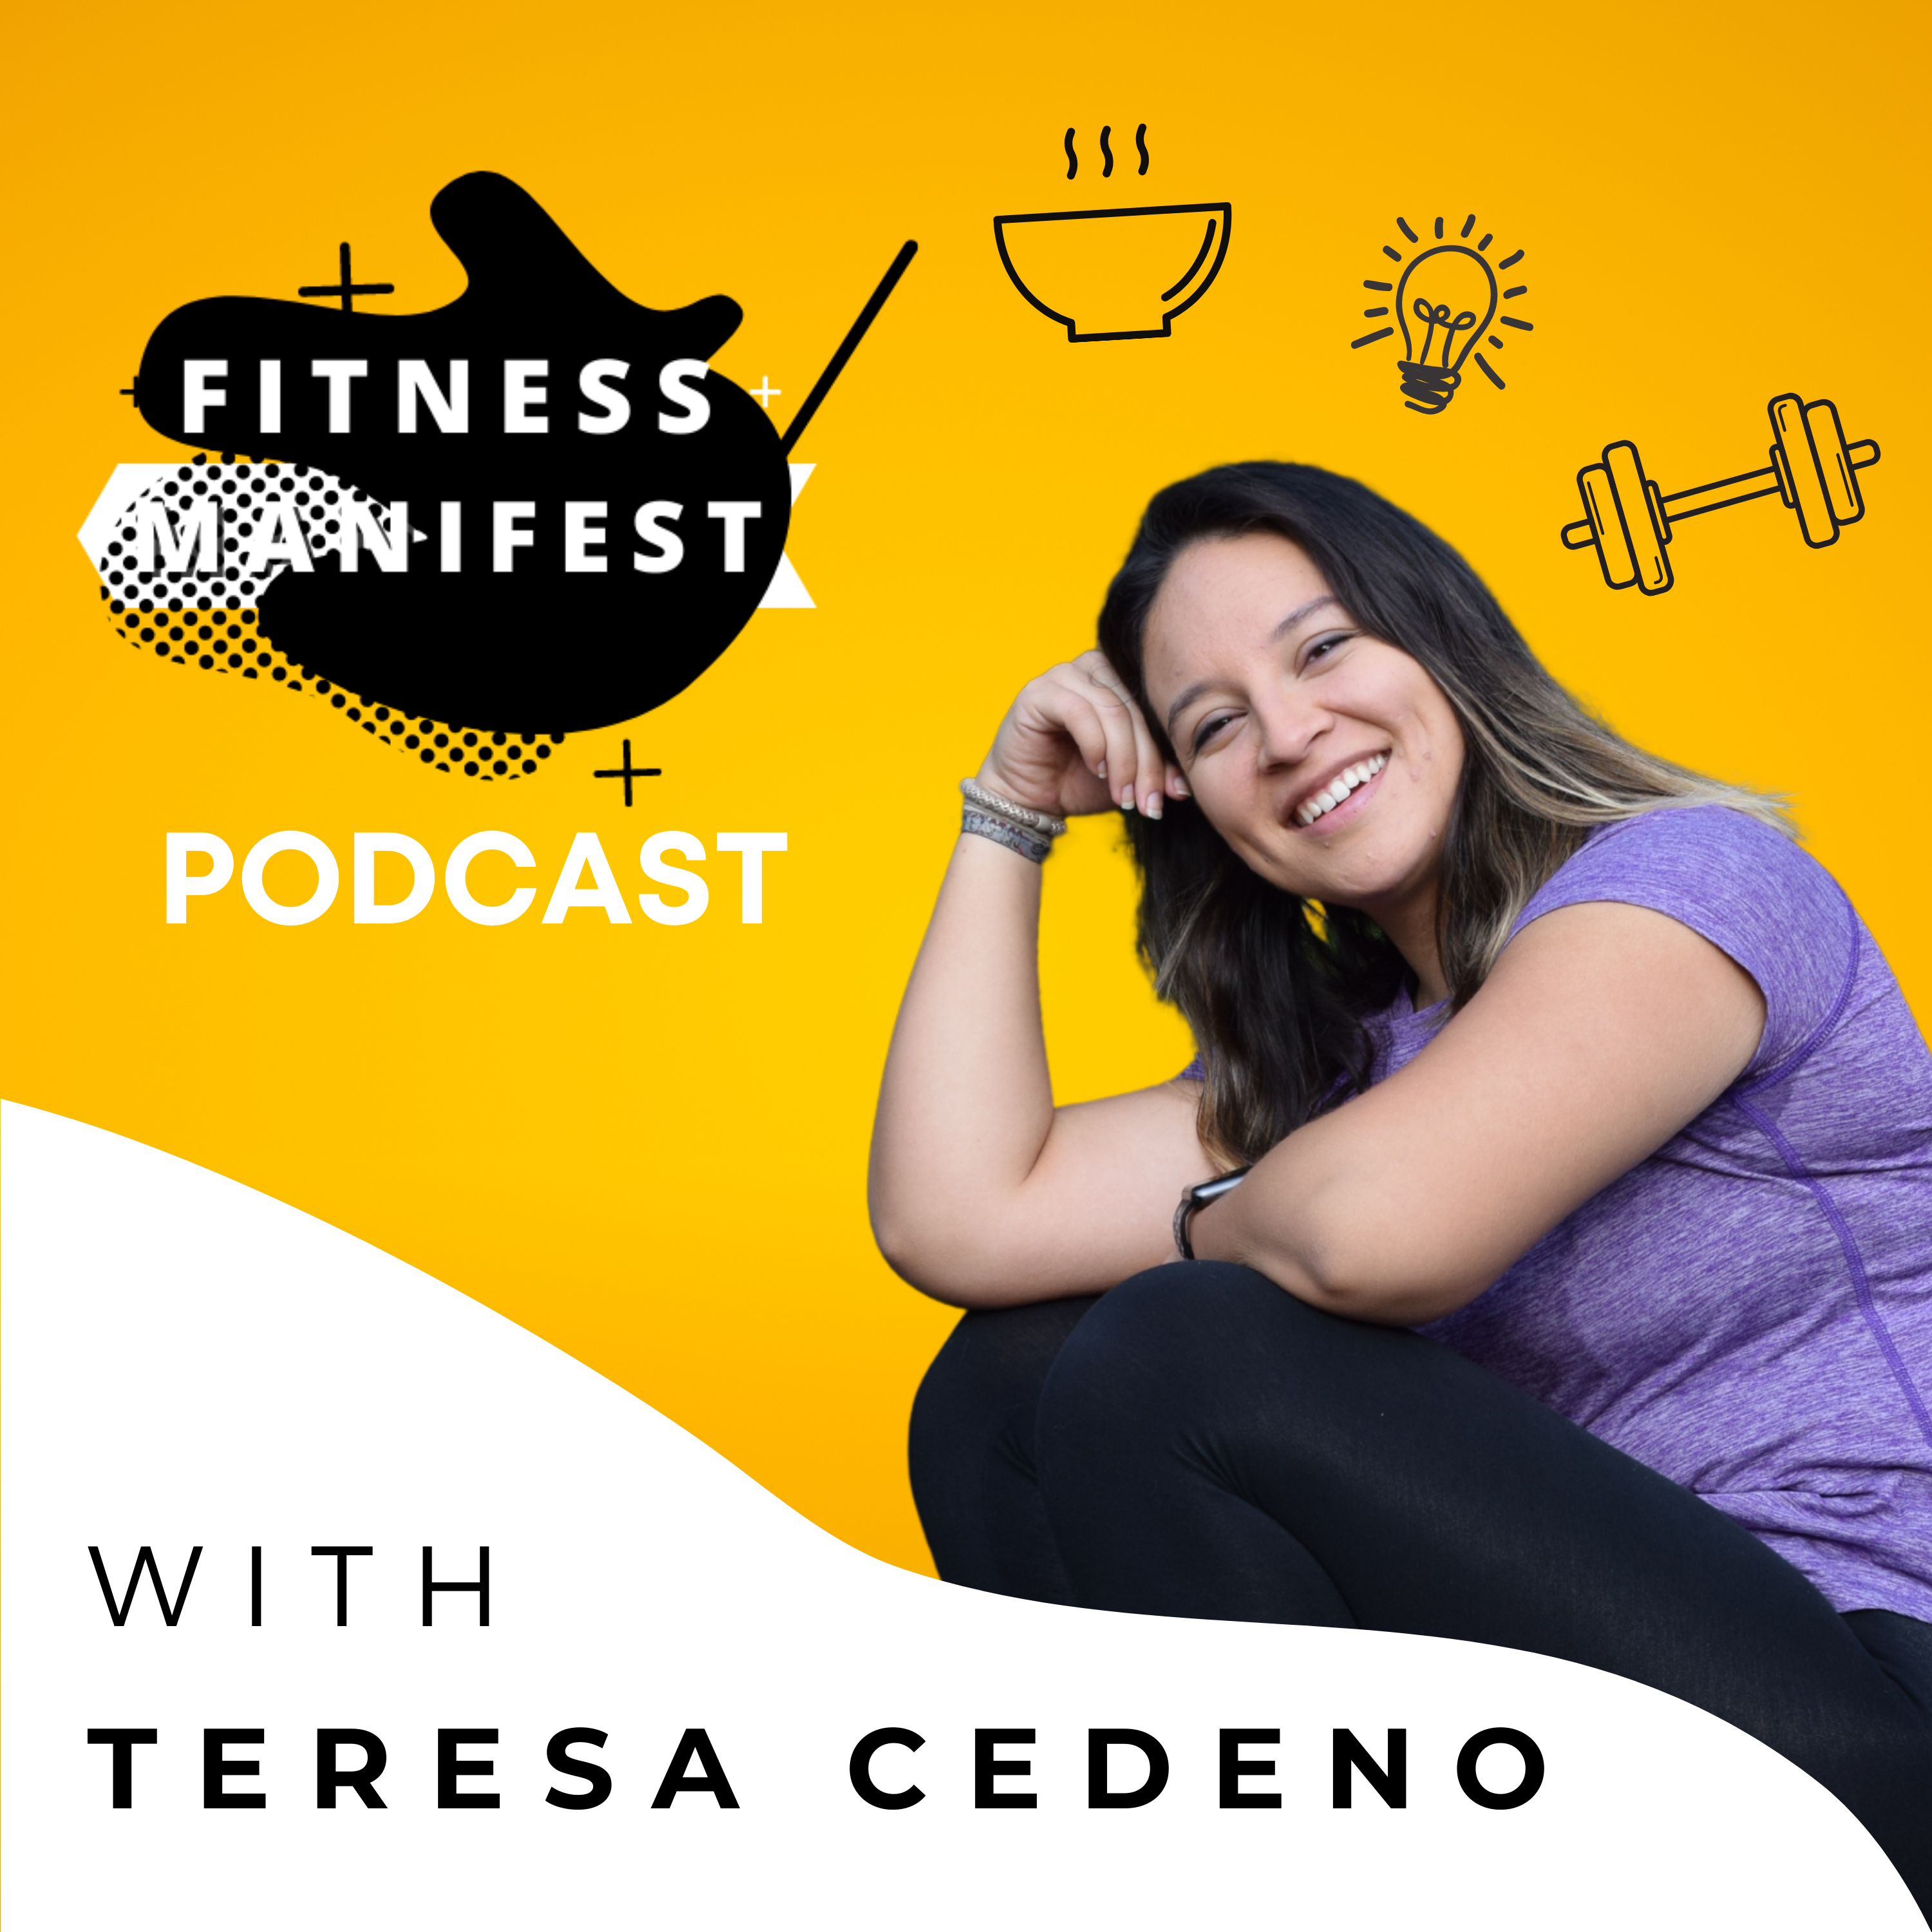 32. The 7 Principles of Health & Fitness feat. Dave Sherwin